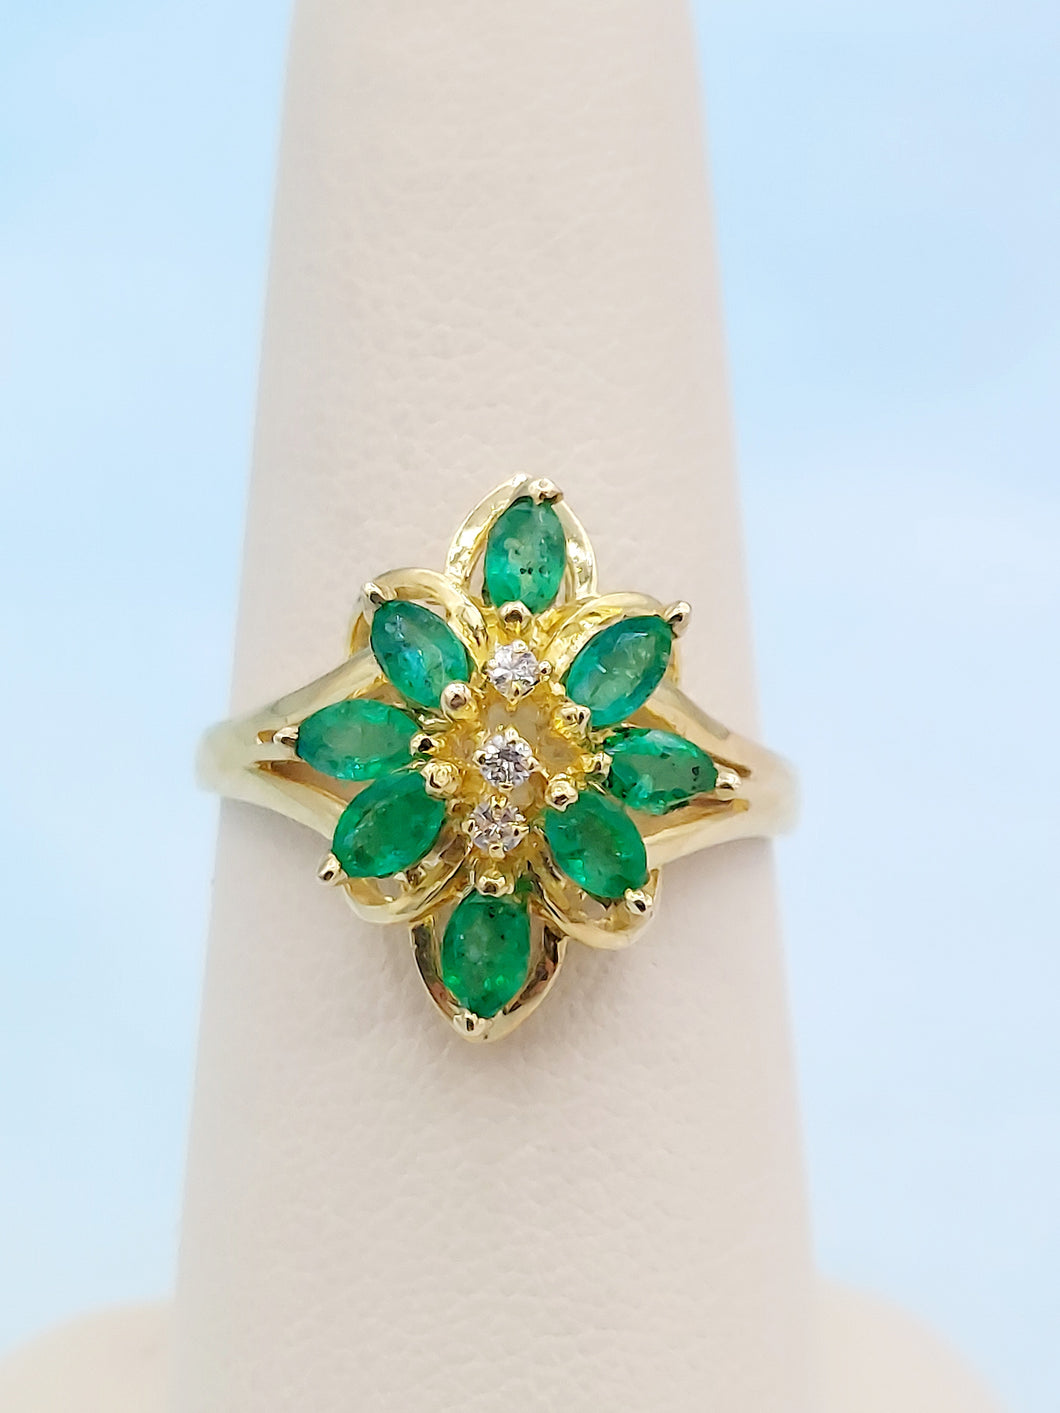 Emerald Floral Ring with Small Diamonds - 14K Yellow Gold